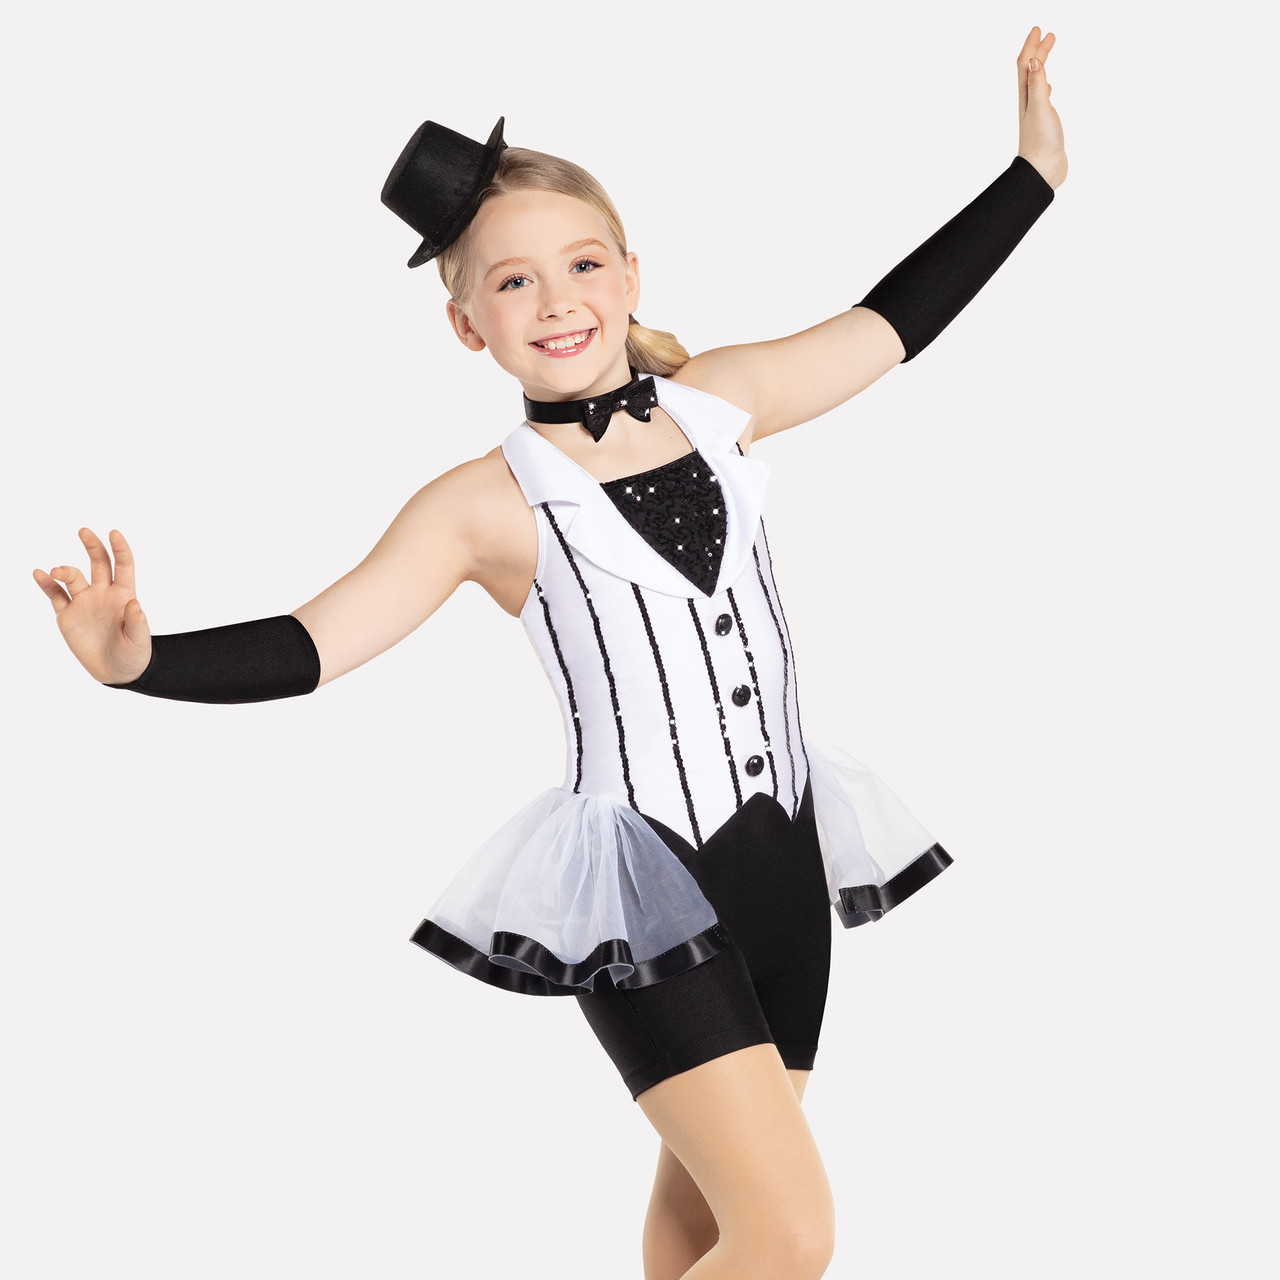 ND Academy of Dance Girls Dance Costume and accessories – $120 Value! –  Lend A Hand Up